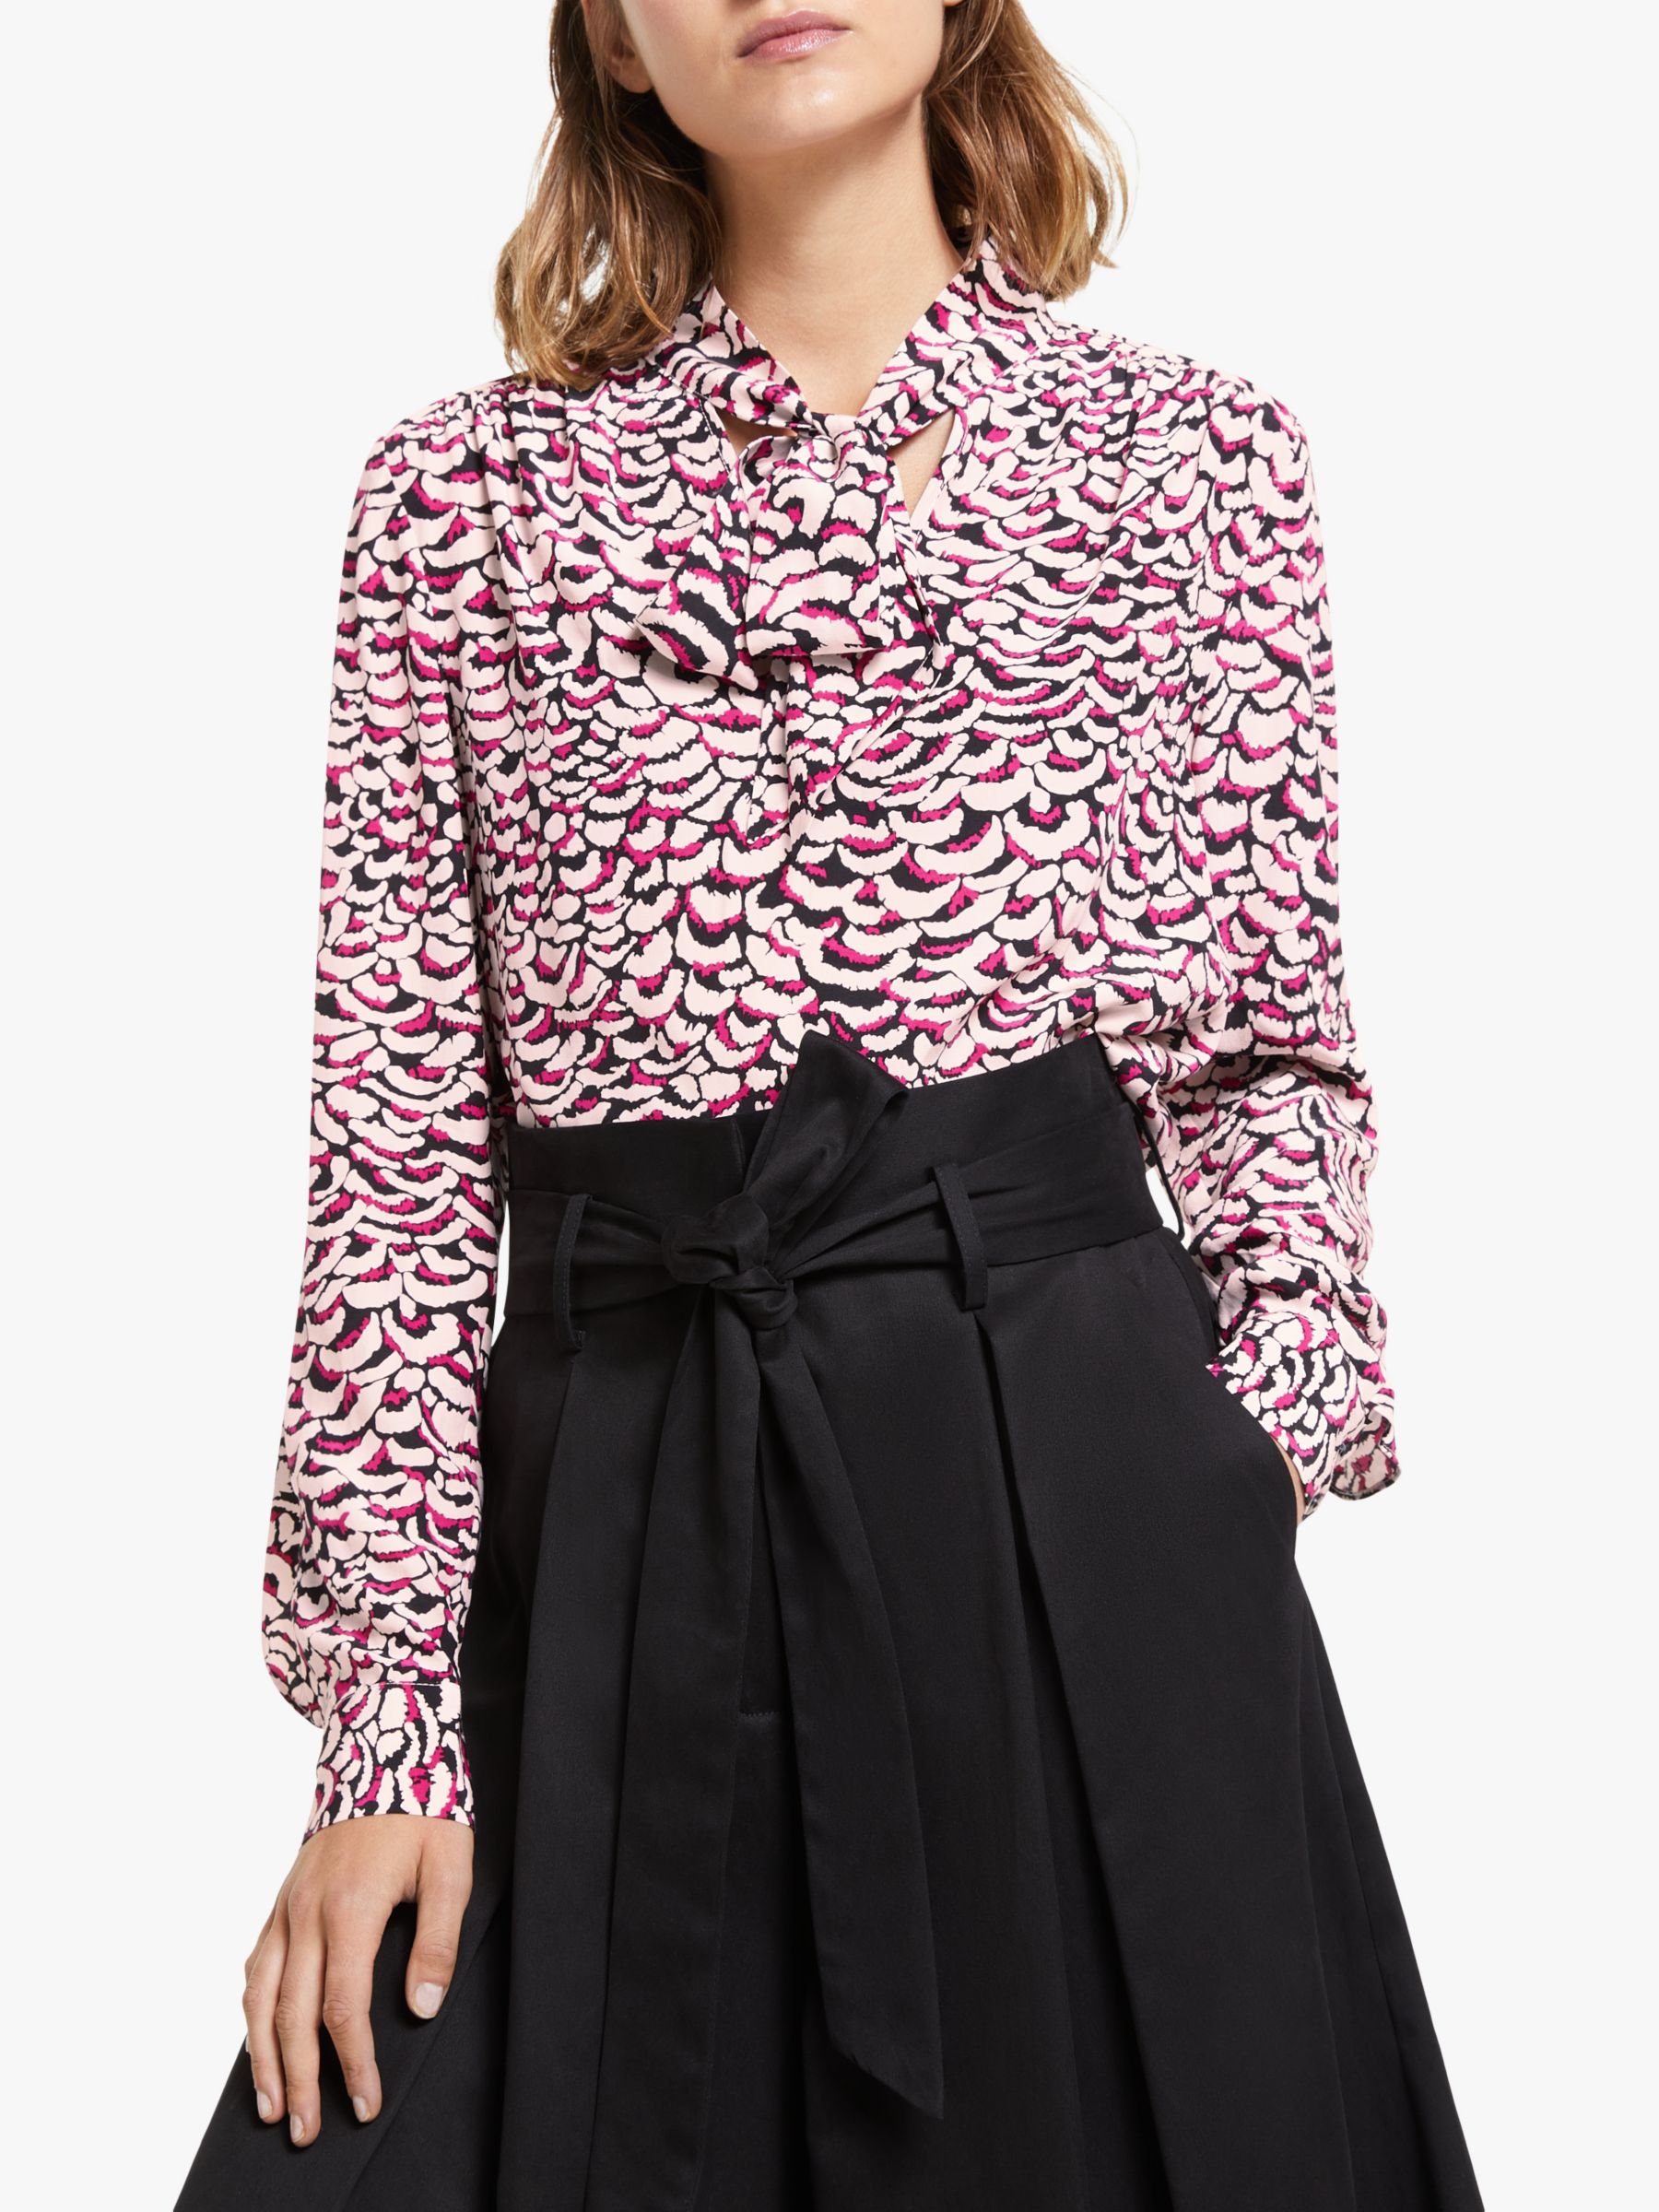 Somerset by Alice Temperley Feather Print Blouse, Pink